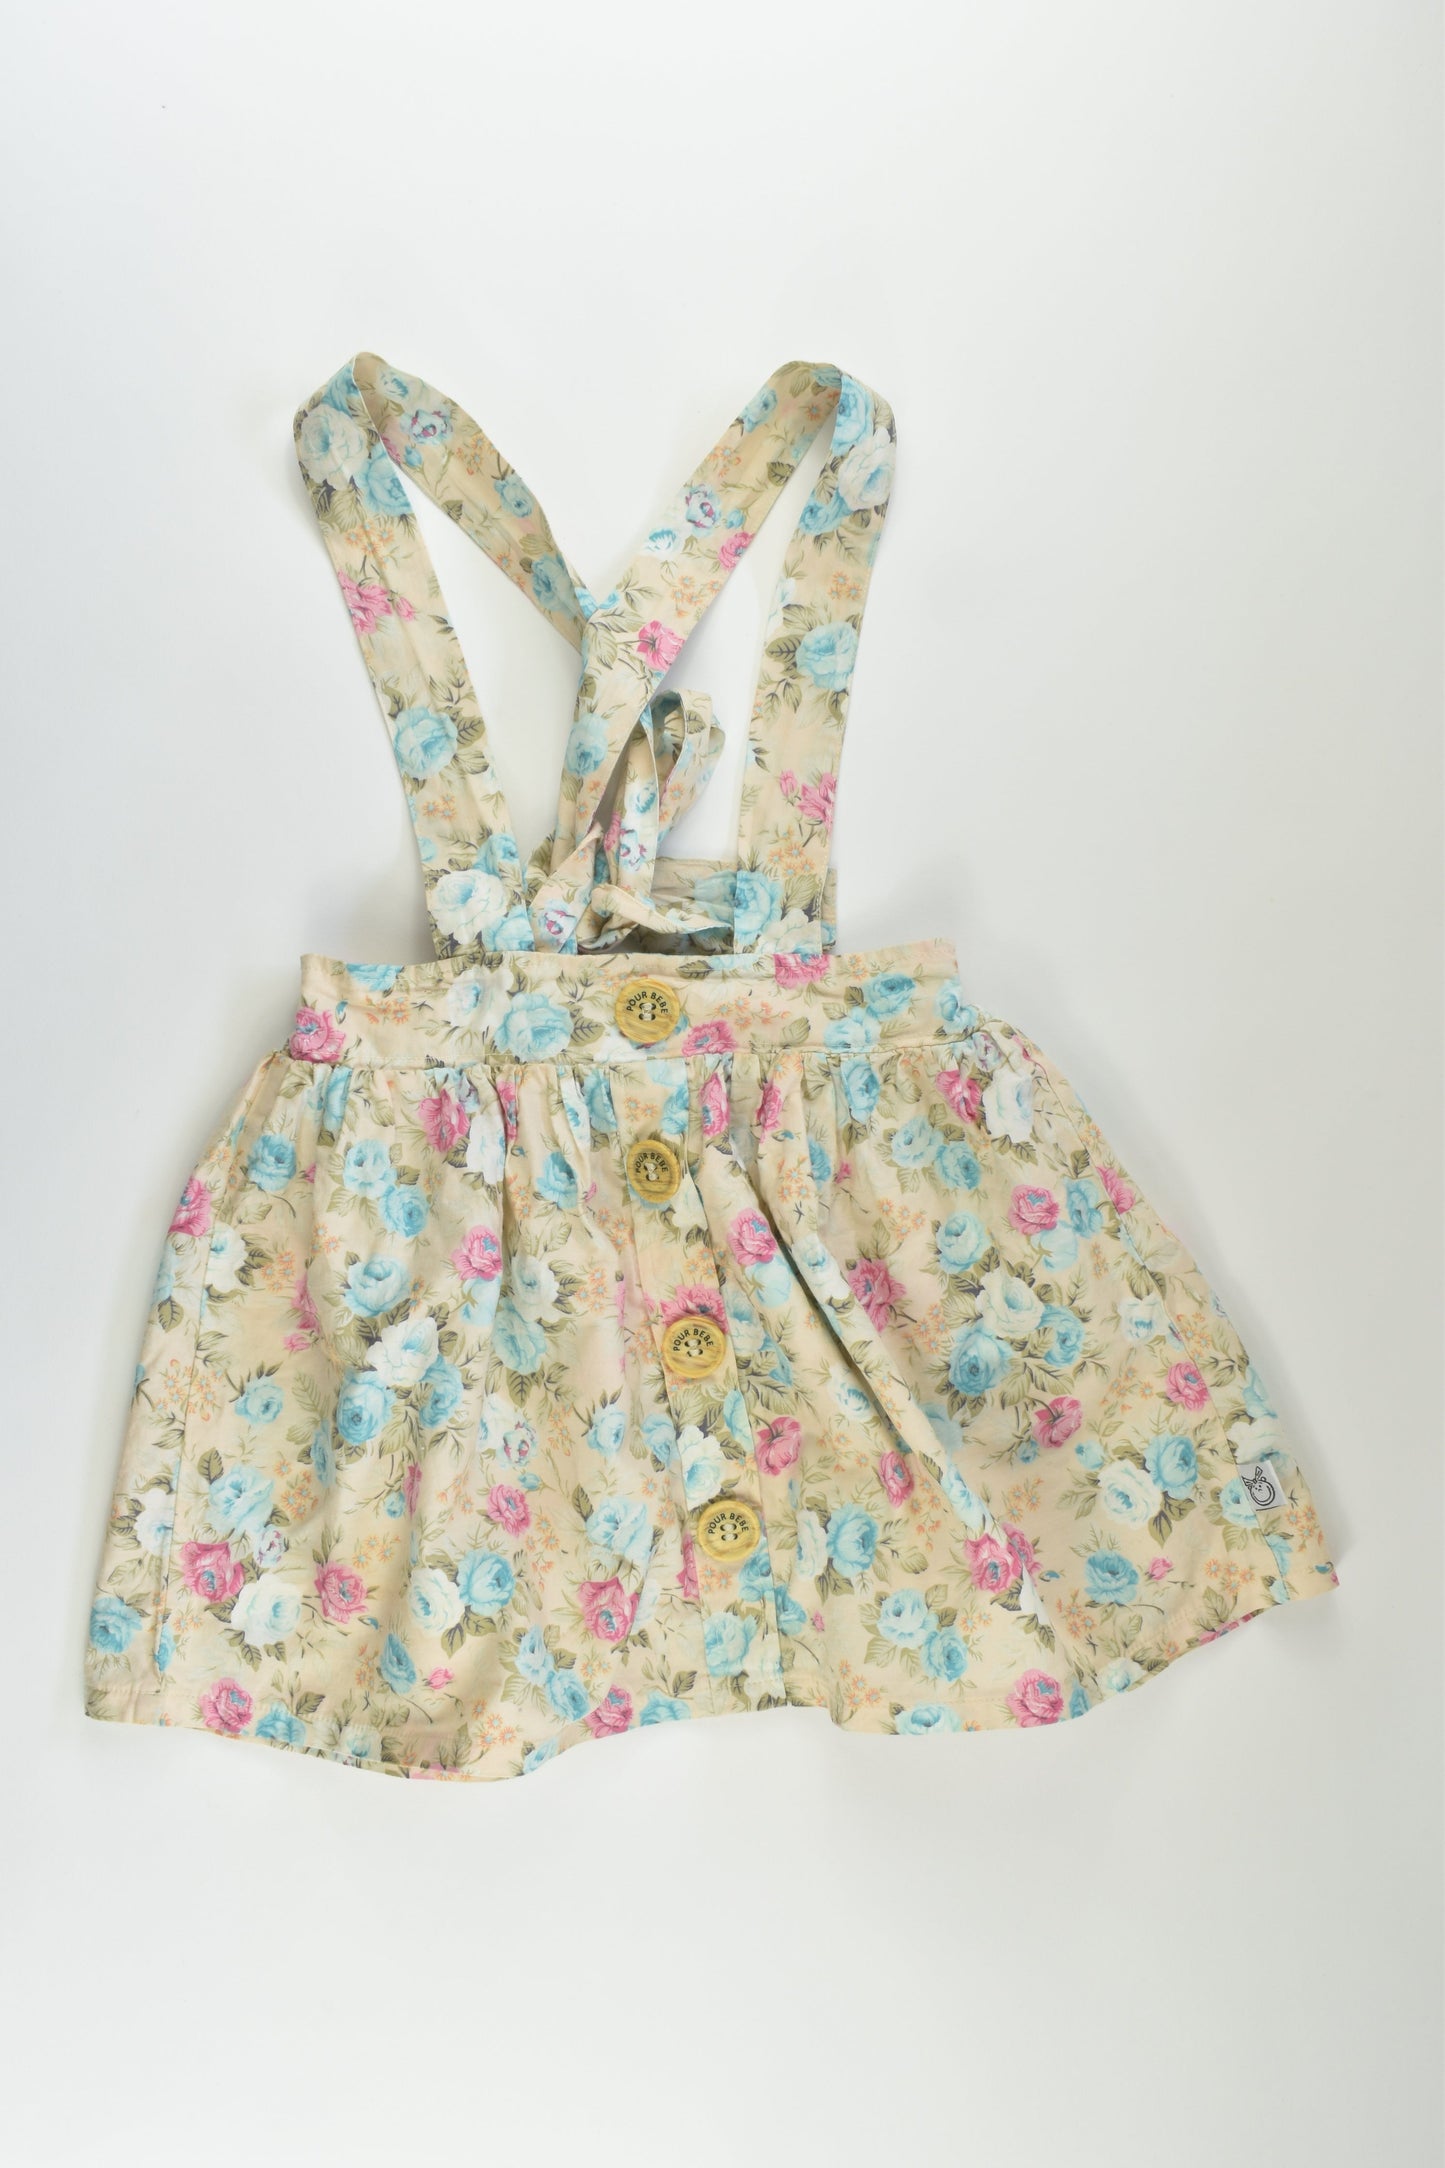 Pour Bebe by Couture Kidz Size 6 Suspender Skirt